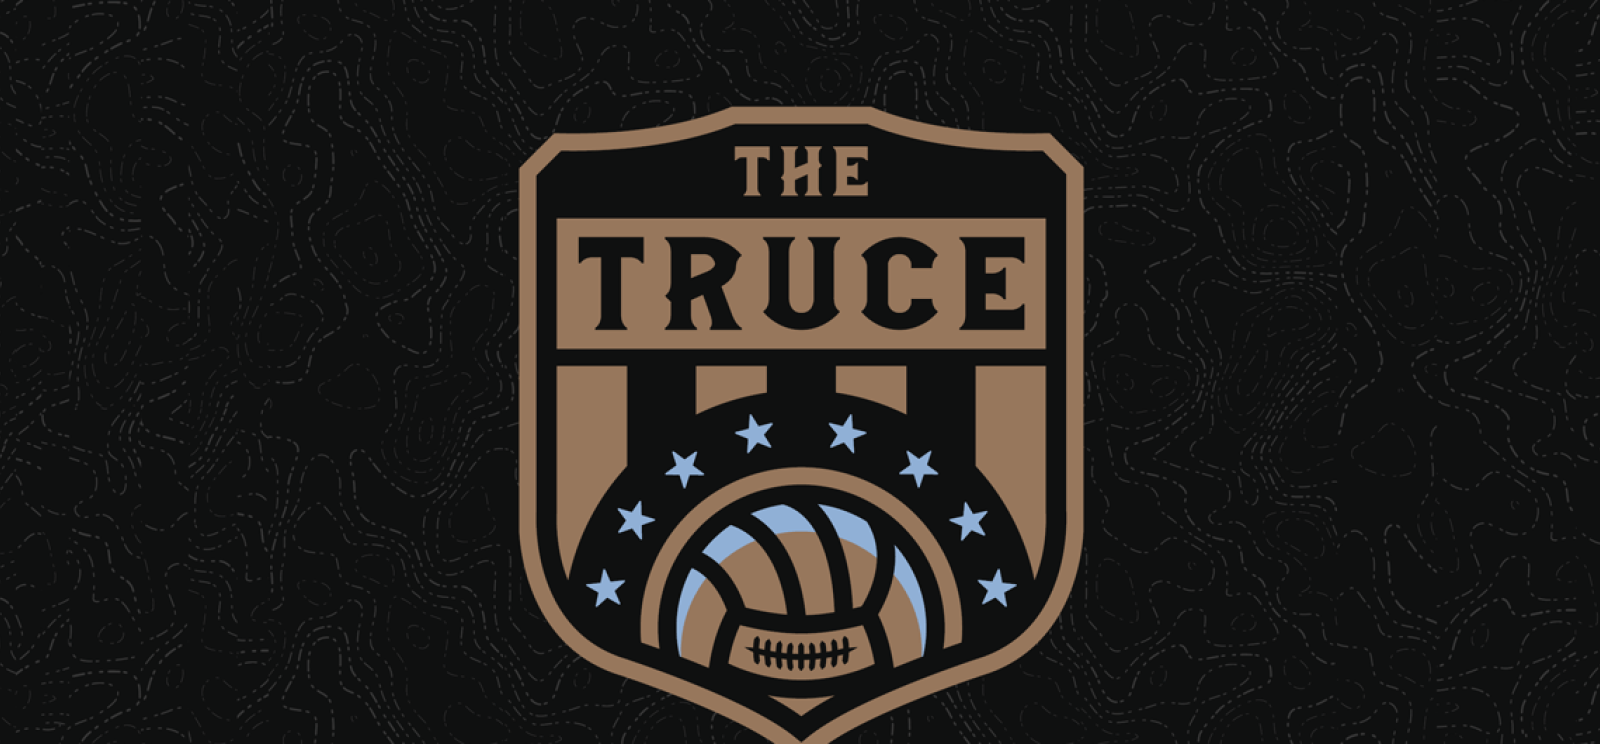 Black background. Dark gold shield-shaped logo featuring a soccer ball. Text: 'The Truce'